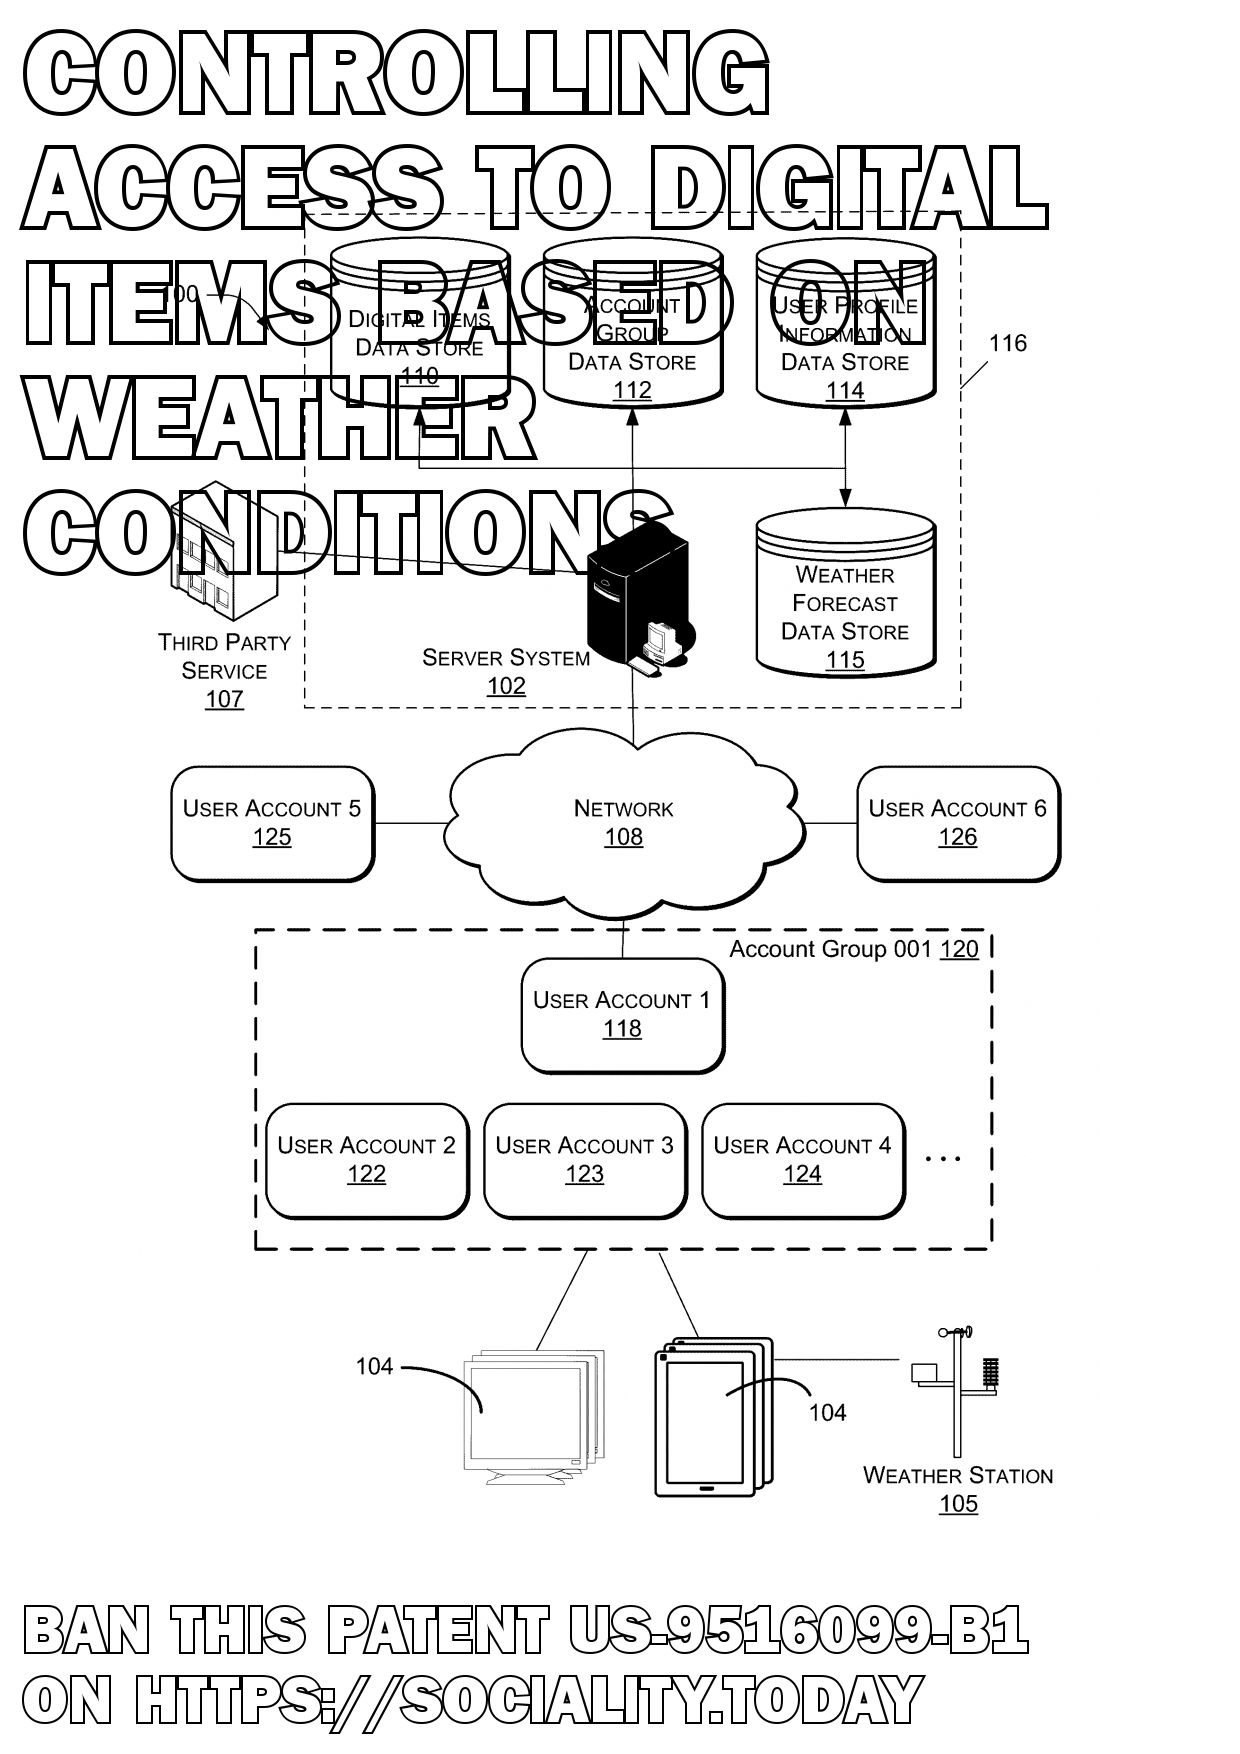 Controlling access to digital items based on weather conditions  - US-9516099-B1